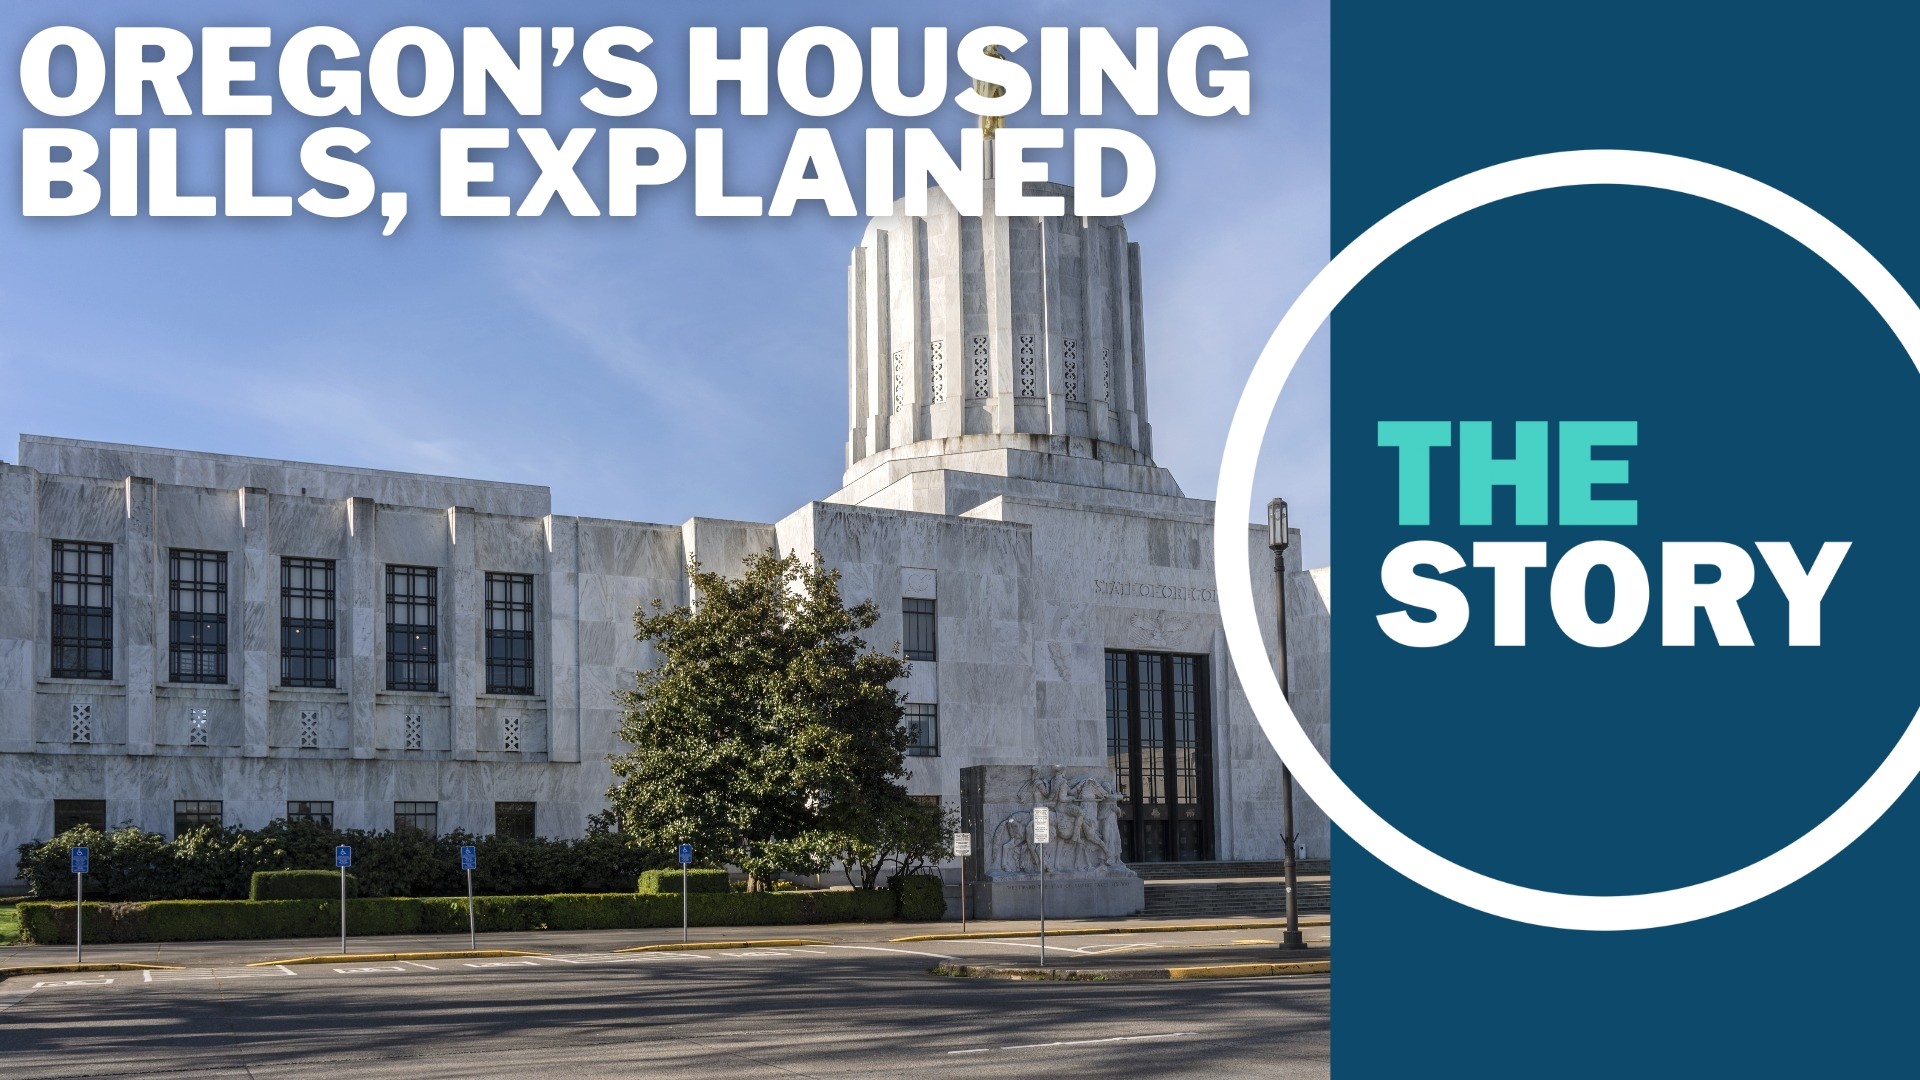 Two housing bills are waiting for Kotek's signature, including a bill she introduced this session.